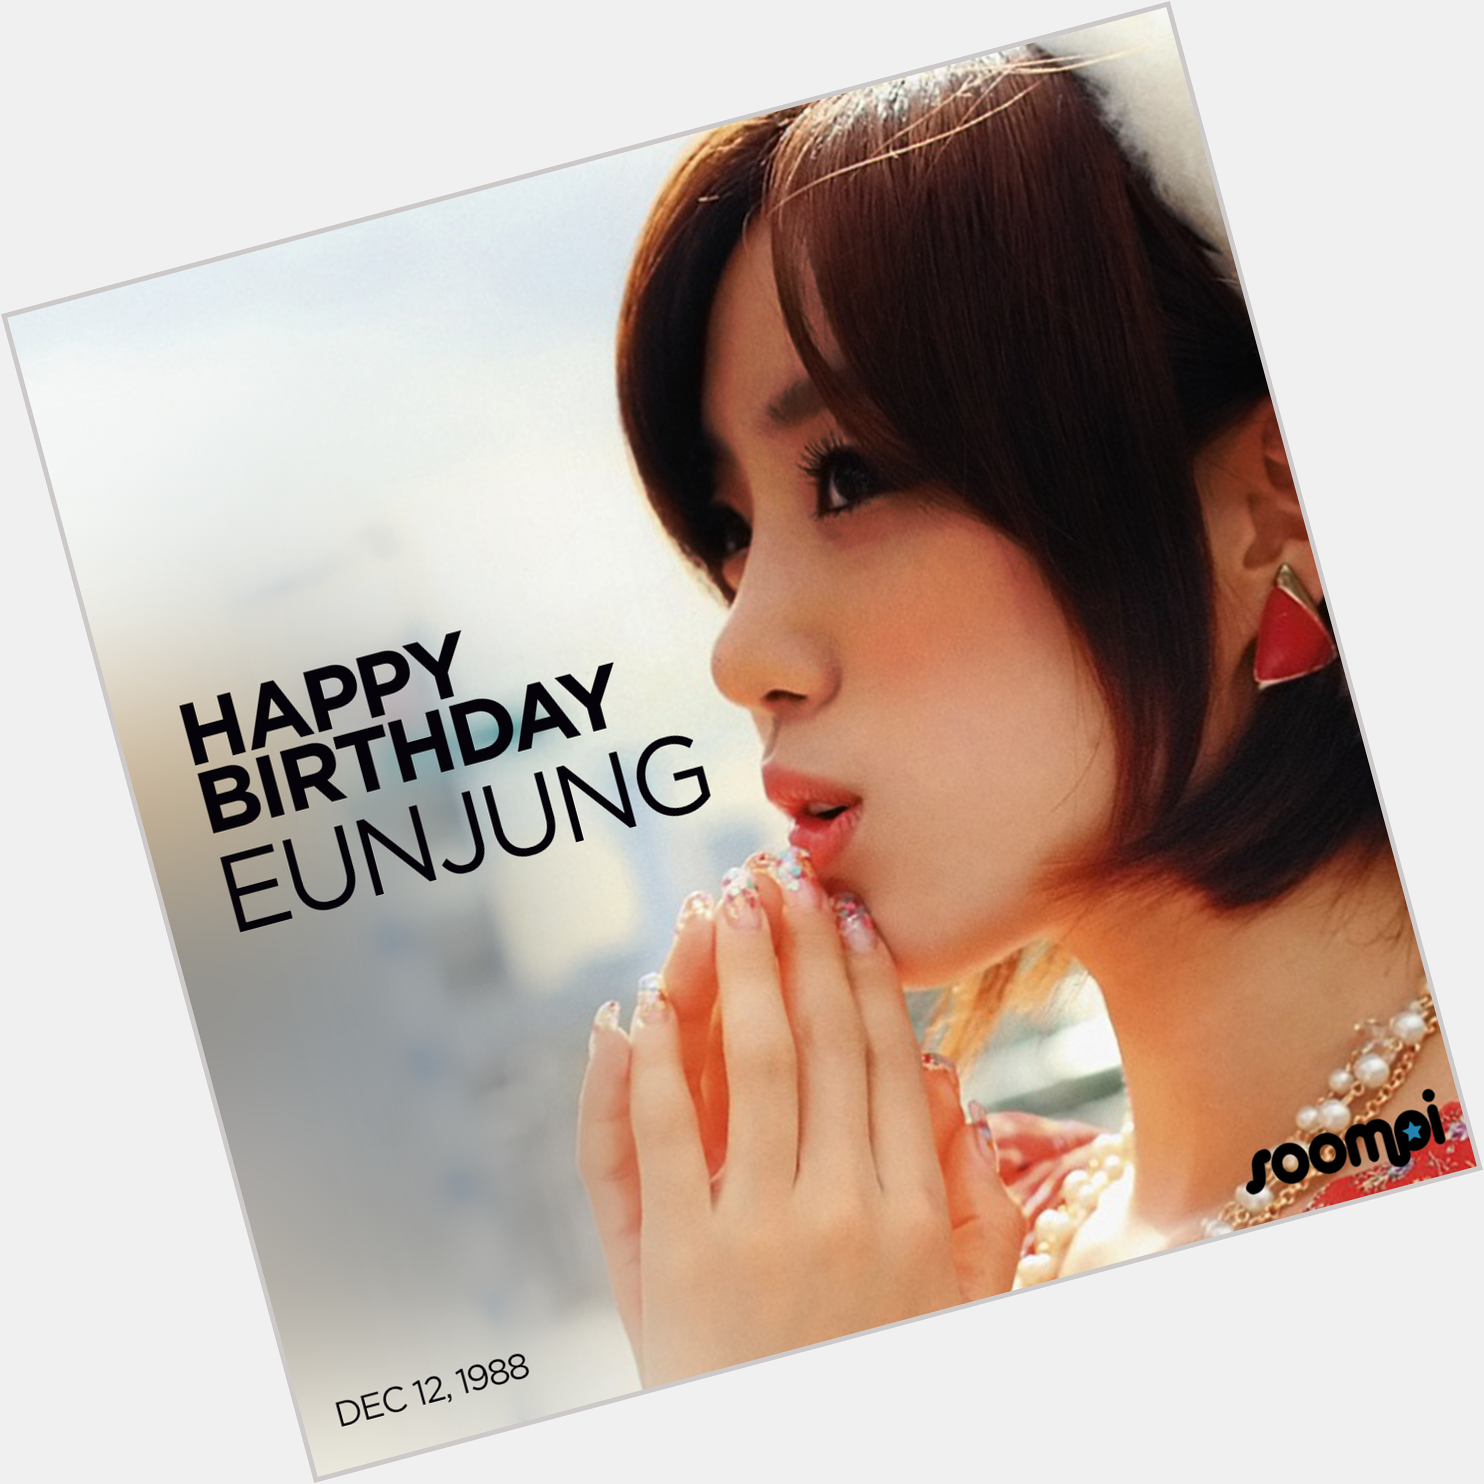 Happy Birthday to Eunjung! Celebrate by watching her on 